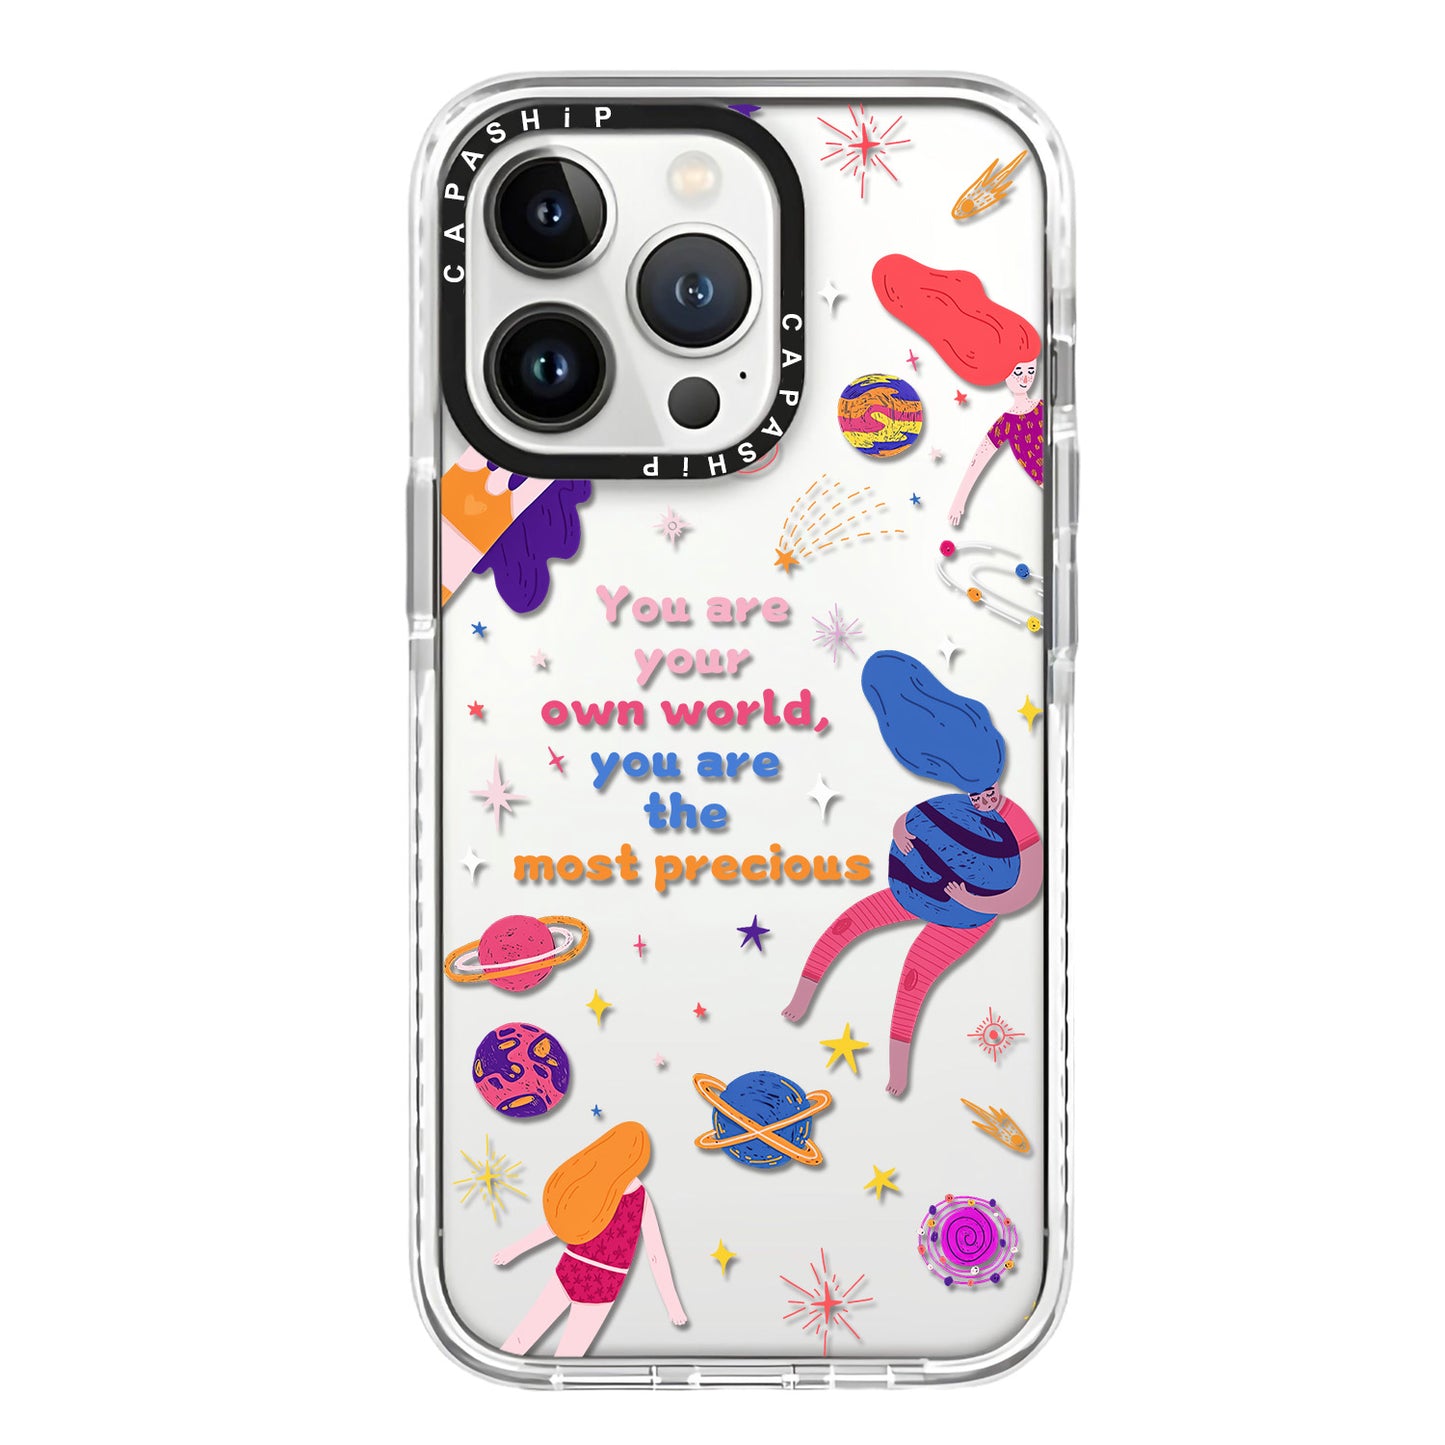 Loveme phone case for all iPhone Model